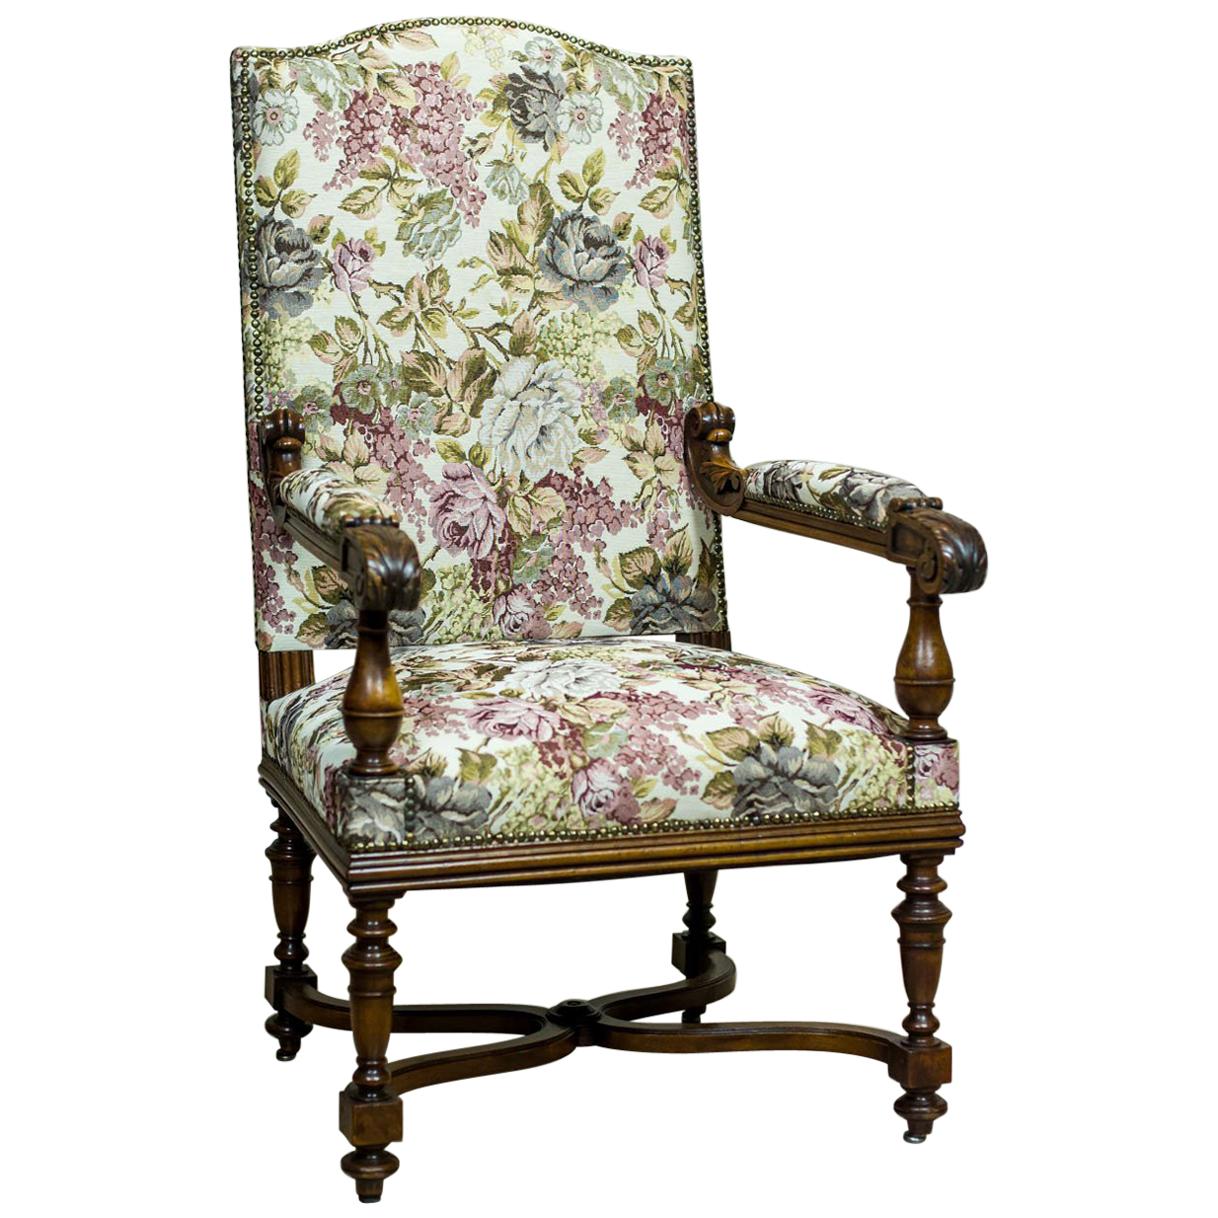 French Oak Armchair/Throne from the Turn of the 19th and 20th Centuries